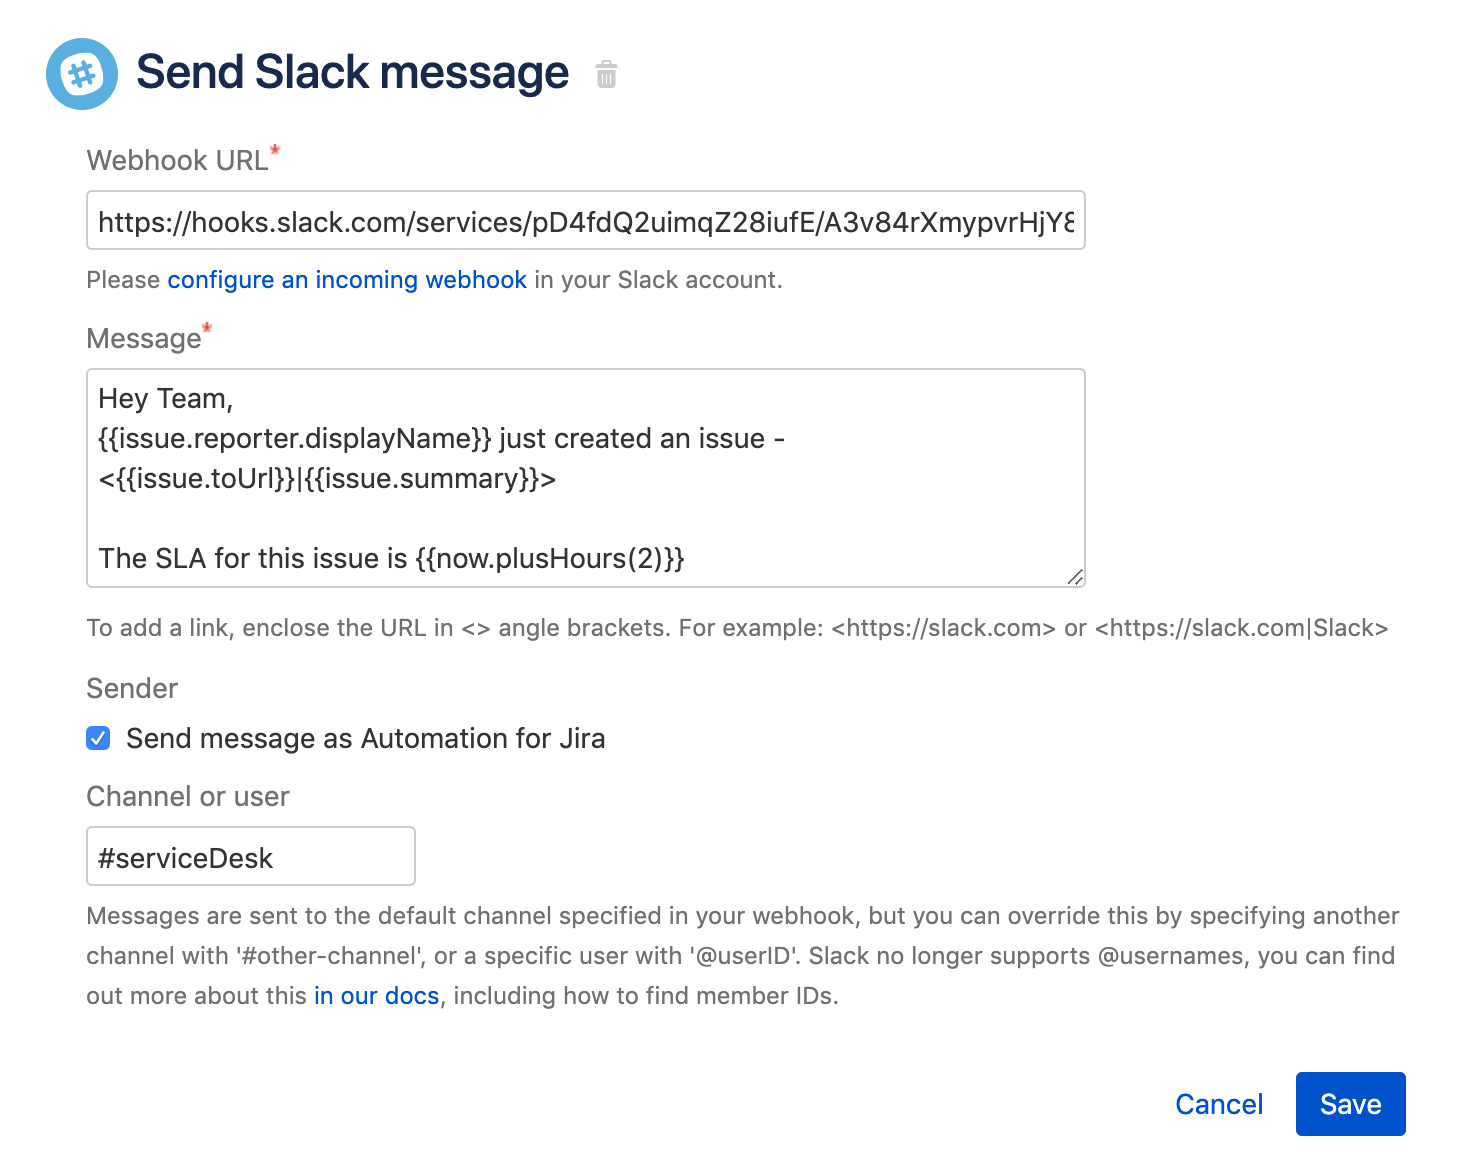 Screenshot of "Send Slack message" action. The "Webhook URL", "Message", and "Channel or user" fields are filled in.